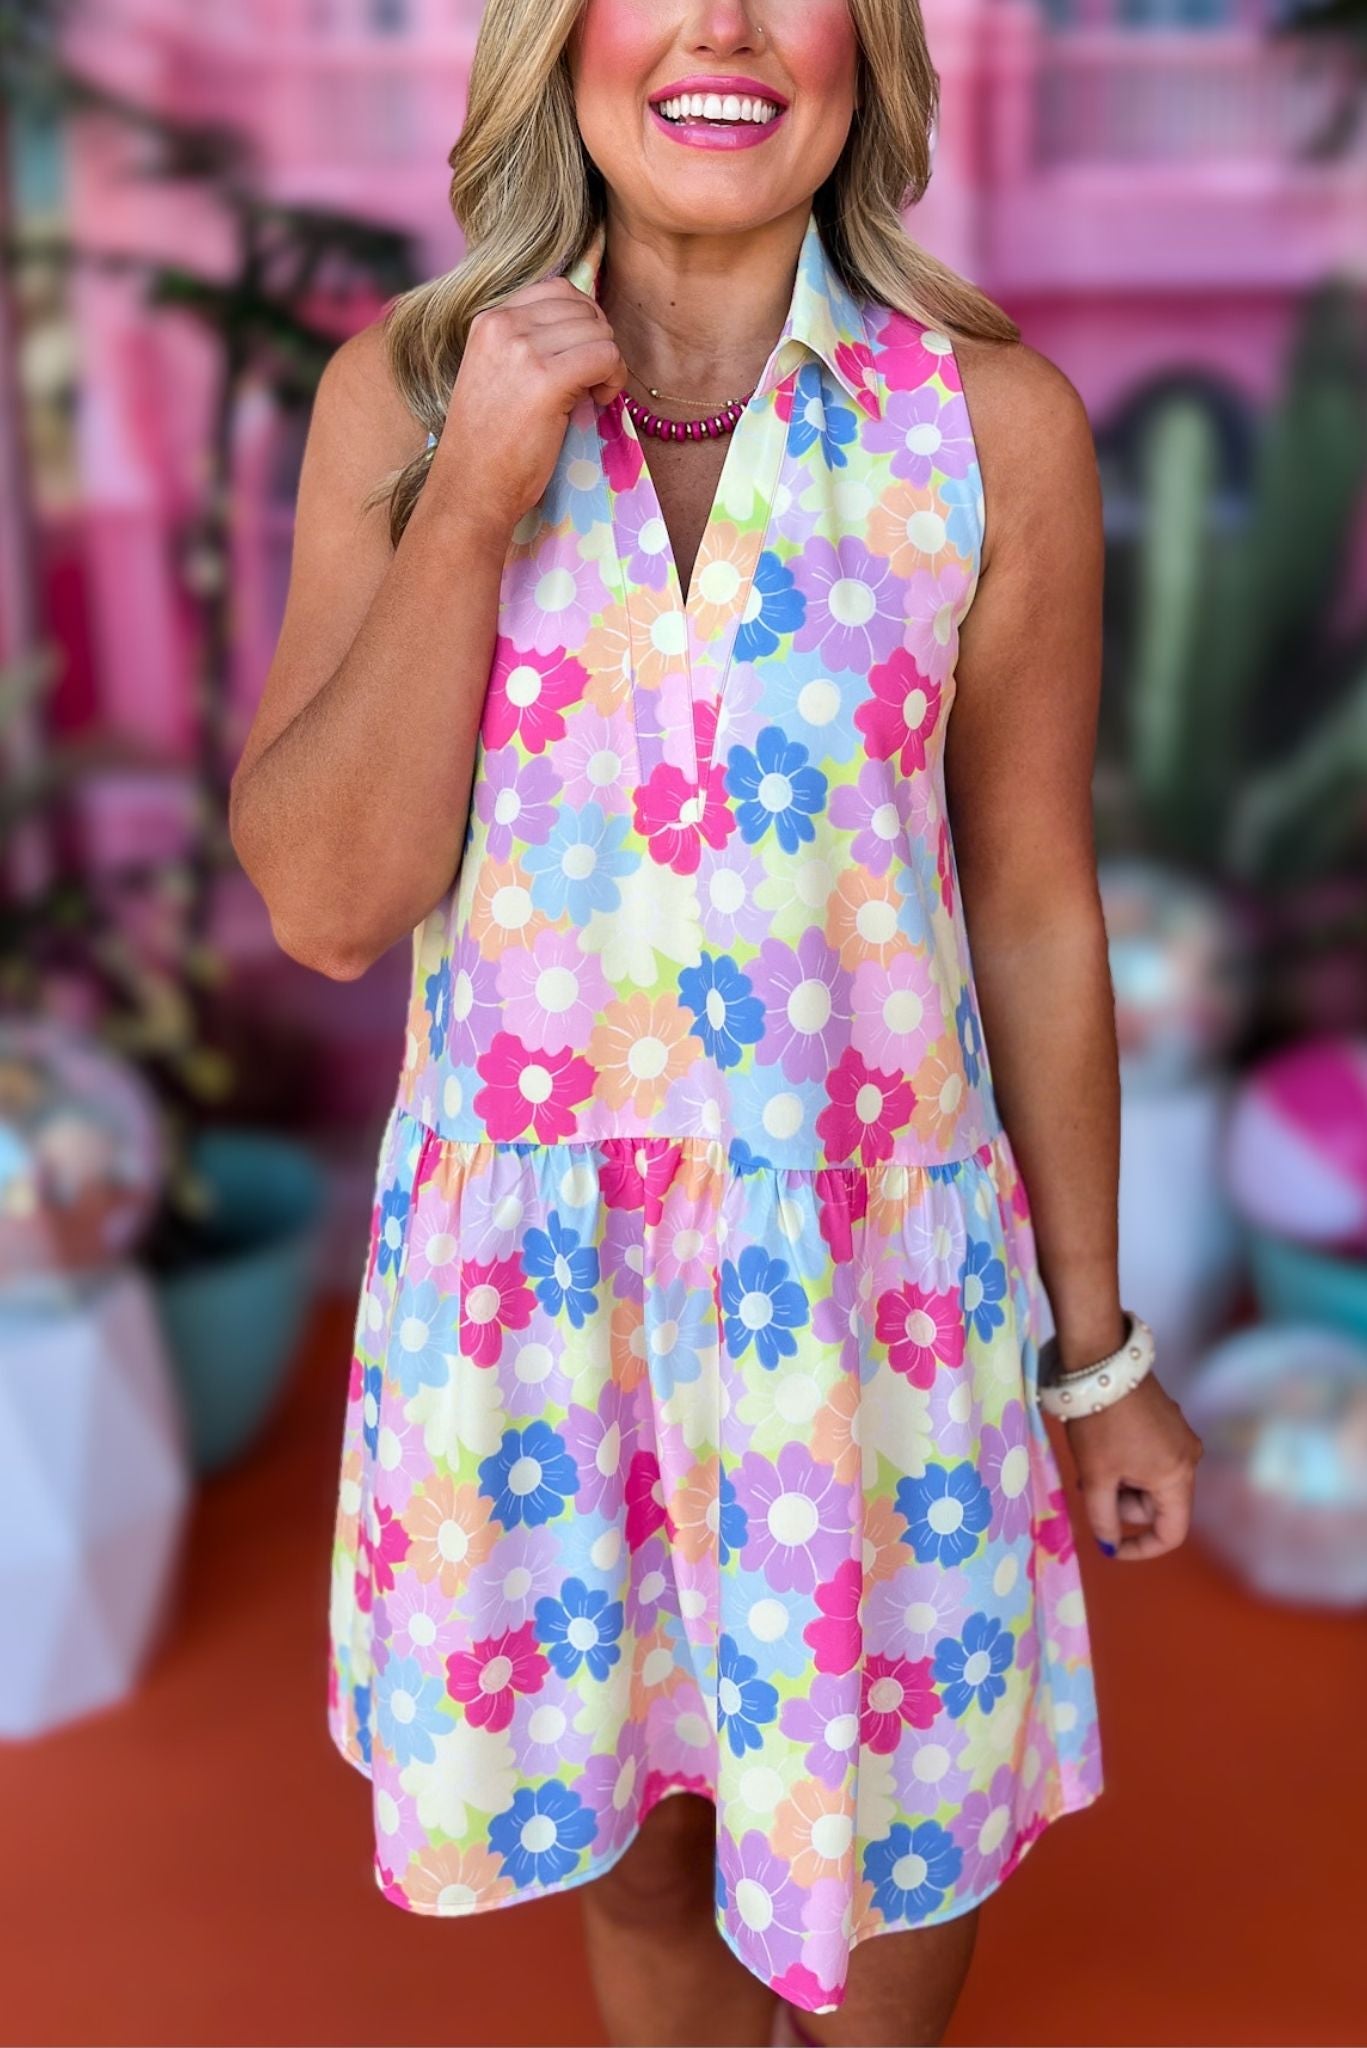 SSYS The Kendall Sleeveless Collared Dress In Pastel Floral, ssys the label, spring break dress, spring break style, spring fashion affordable fashion, elevated style, bright style, printed dress, mom style, shop style your senses by mallory fitzsimmons, ssys by mallory fitzsimmons